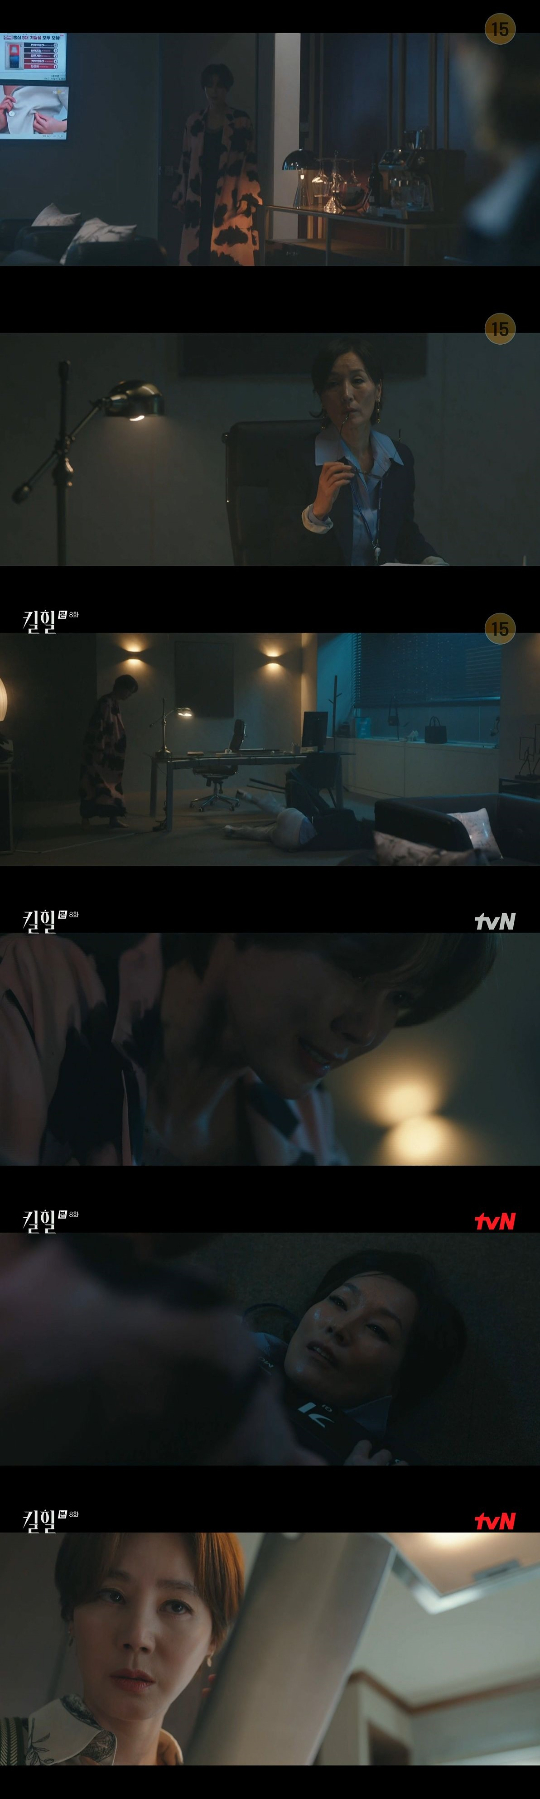 In the TVN drama Kill Heel, which was broadcast on the afternoon of the 31st, the show host, Kim Sung-ryung, was shown talking to Hyun-wook, president of Uni Home Shopping.On the day of the broadcast, Oksun said, I actually have something to give to the boss. Hyun-wook was surprised, saying, What? How do you have this?I just found my owner, Ok-sun said, adding, I heard from Woo-hyun (Kim Ha-neul), the person that the boss loved. Its Han Hye-soo.Hyun-wook pressed, So why is this held by the Ok-sun show host? Ok-sun said, Lee Hye-Yeongs sister came to my house.I had the ring. I do not know why. When Hyun-wook showed a serious expression, he said, I do not think you should look for that reason now. Hyun-wook looked at the ring and recalled the past. Hyun-wook of the past gave the ring to his first love Hye-soo, saying, Do you like it? I will keep it all the way.Moran came to Oksun and said, Hes dead. Hyesu. Im Hyesu. Oksun said, Sister calm down.With the peony falling down at the house of the peony behind, the peony picked up the ring of Hyesu, which peony spilled.Then he grabbed Morans nameplate and strangled her. How would I kill him? You knew there was a demon in me.Moran reached out to Oksun, who woke up from his imagination. If you just put up with it a little, he said.